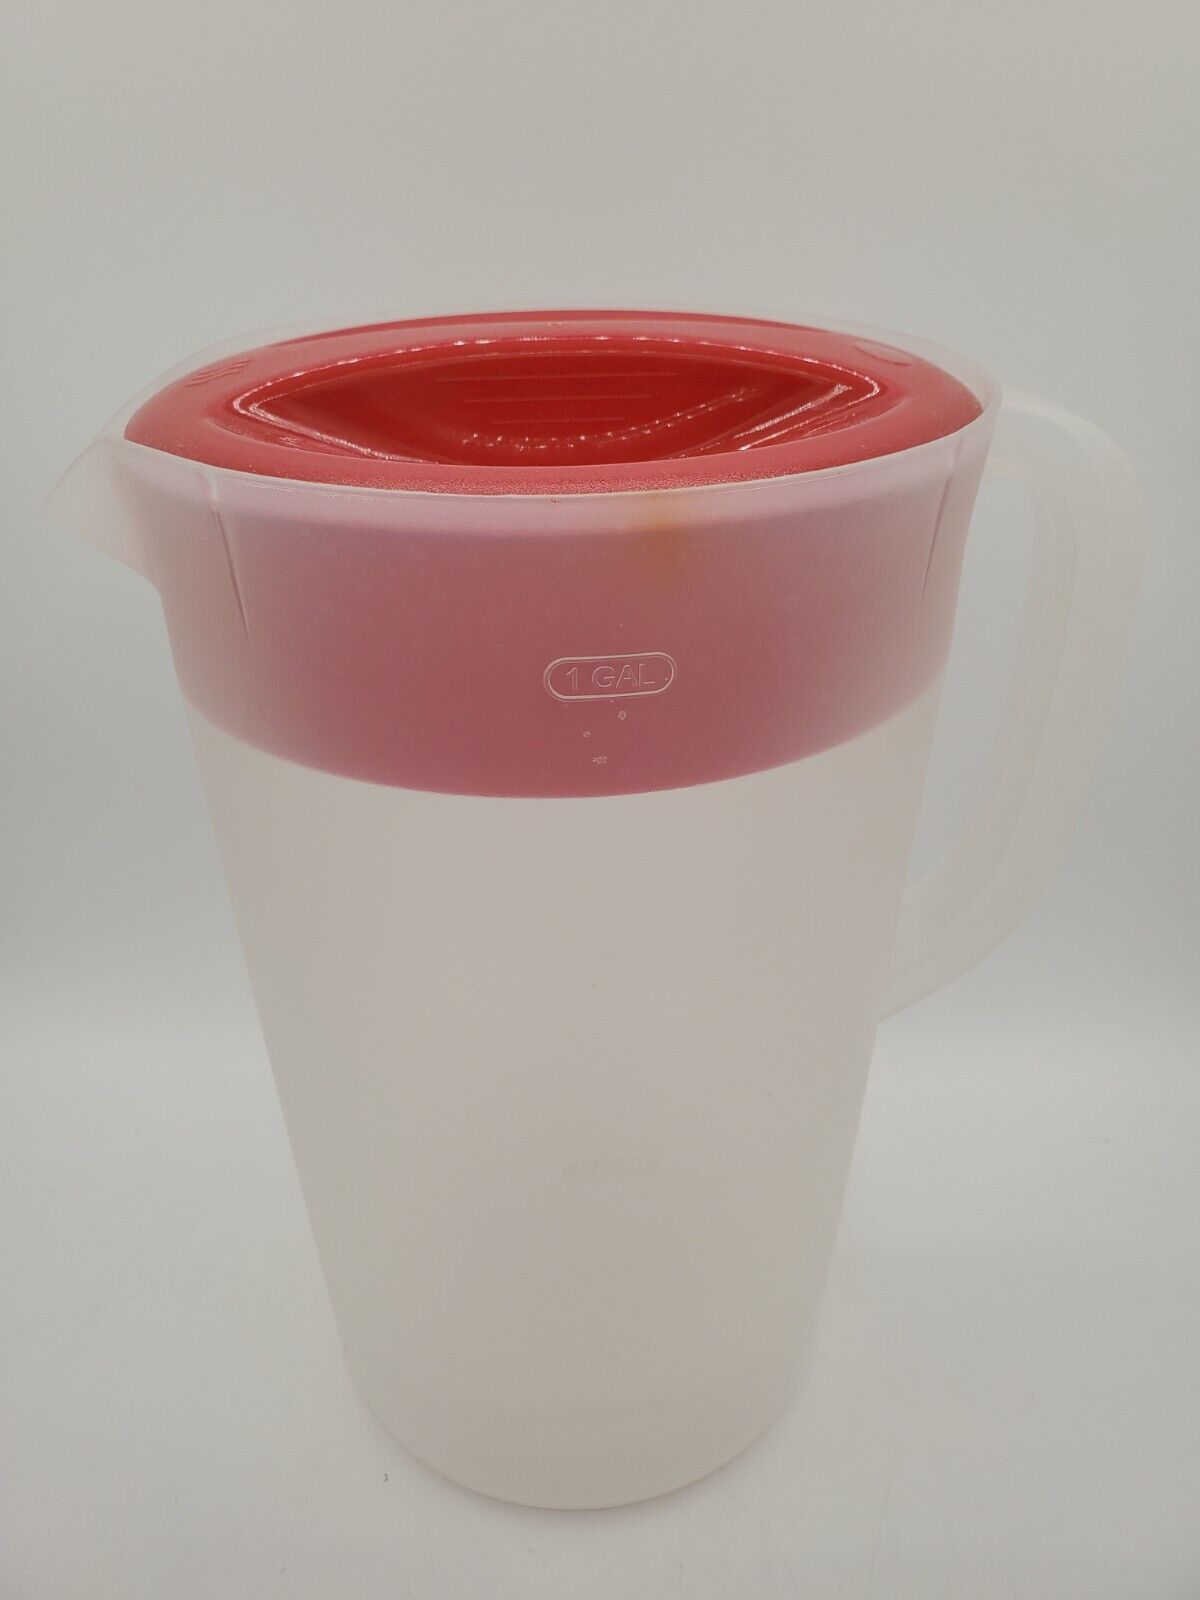 Vintage Rubbermaid 1A21-6 Classic 1 Gallon Frosted Plastic Pitcher with Red Lid